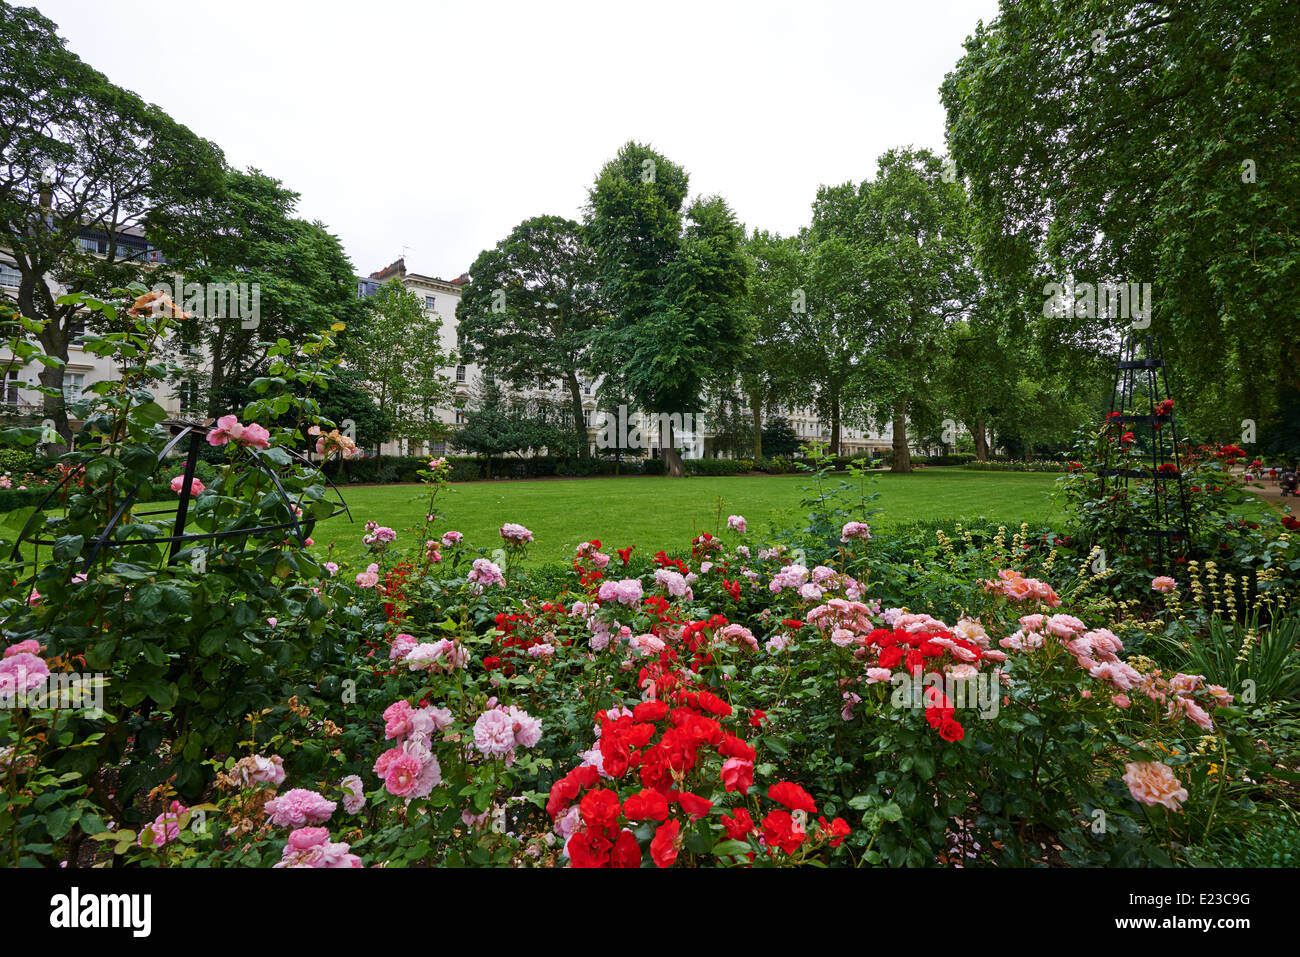 St George's Square Pimlico Westminster London UK Stock Photo